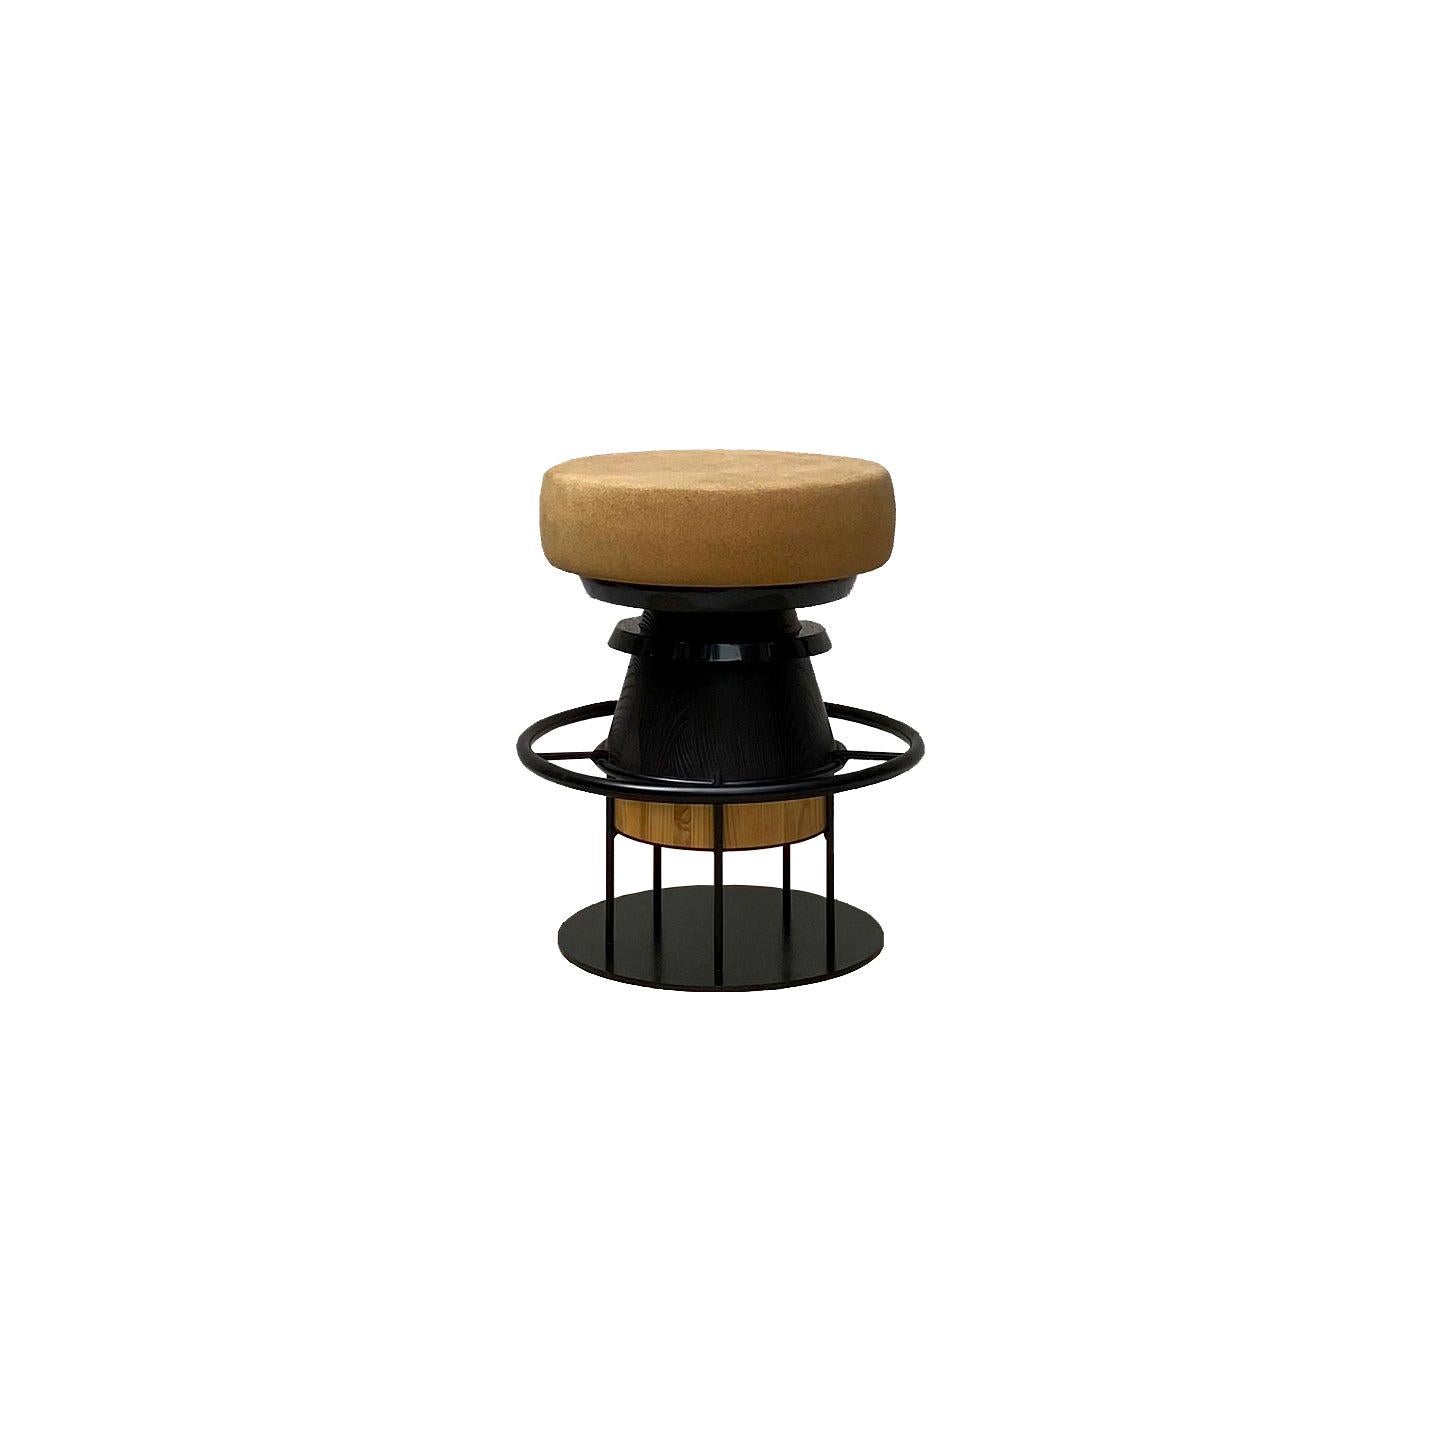 Tembo Low Stool or Pedestal For Sale